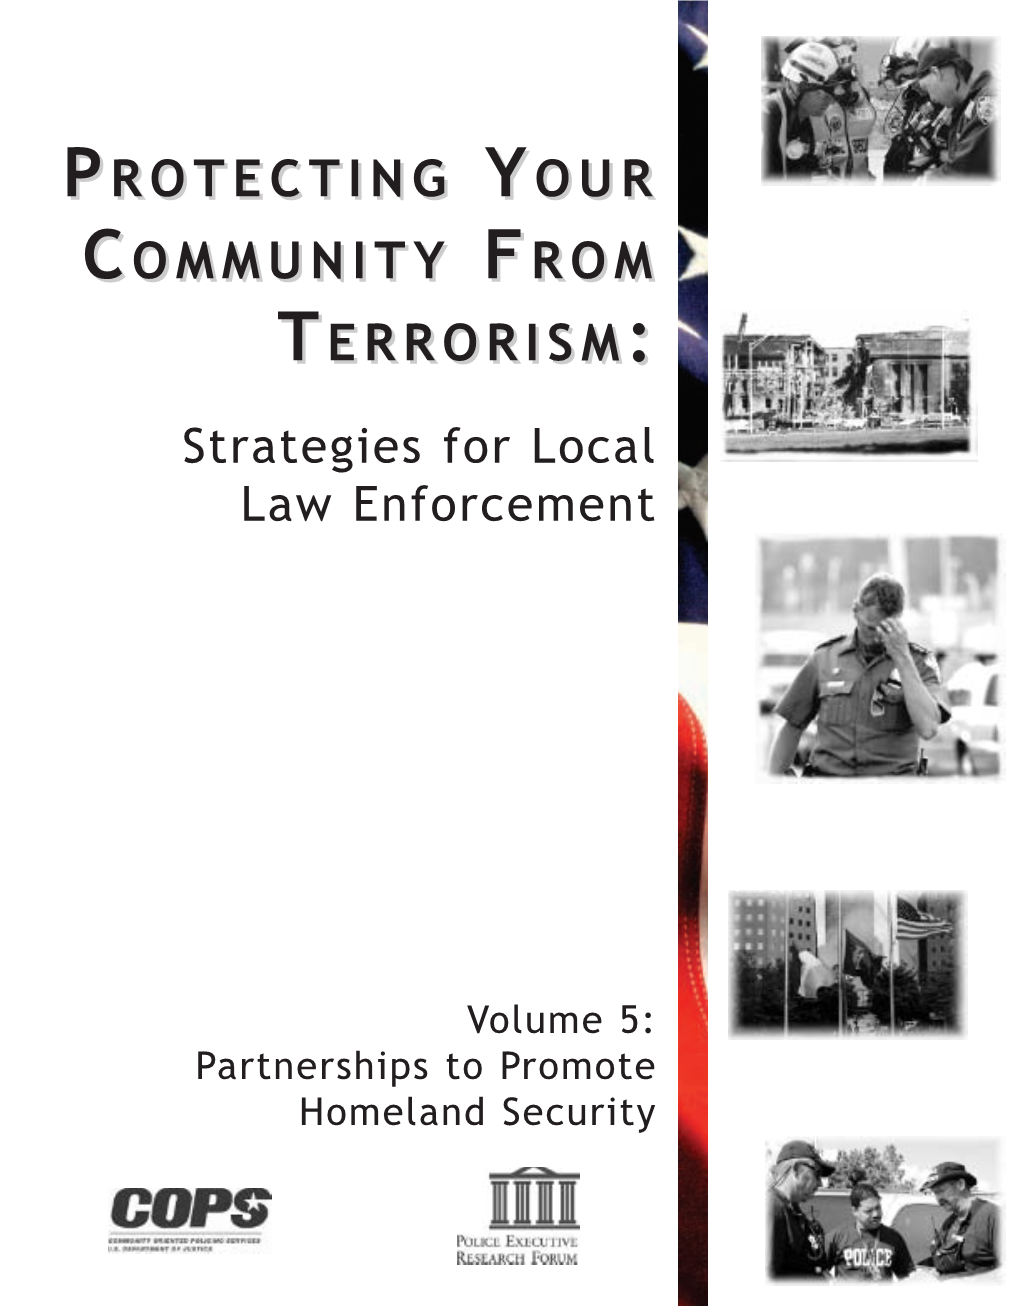 Protecting Your Community from Terrorism: Strategies for Local Law Enforcement, Volume 5